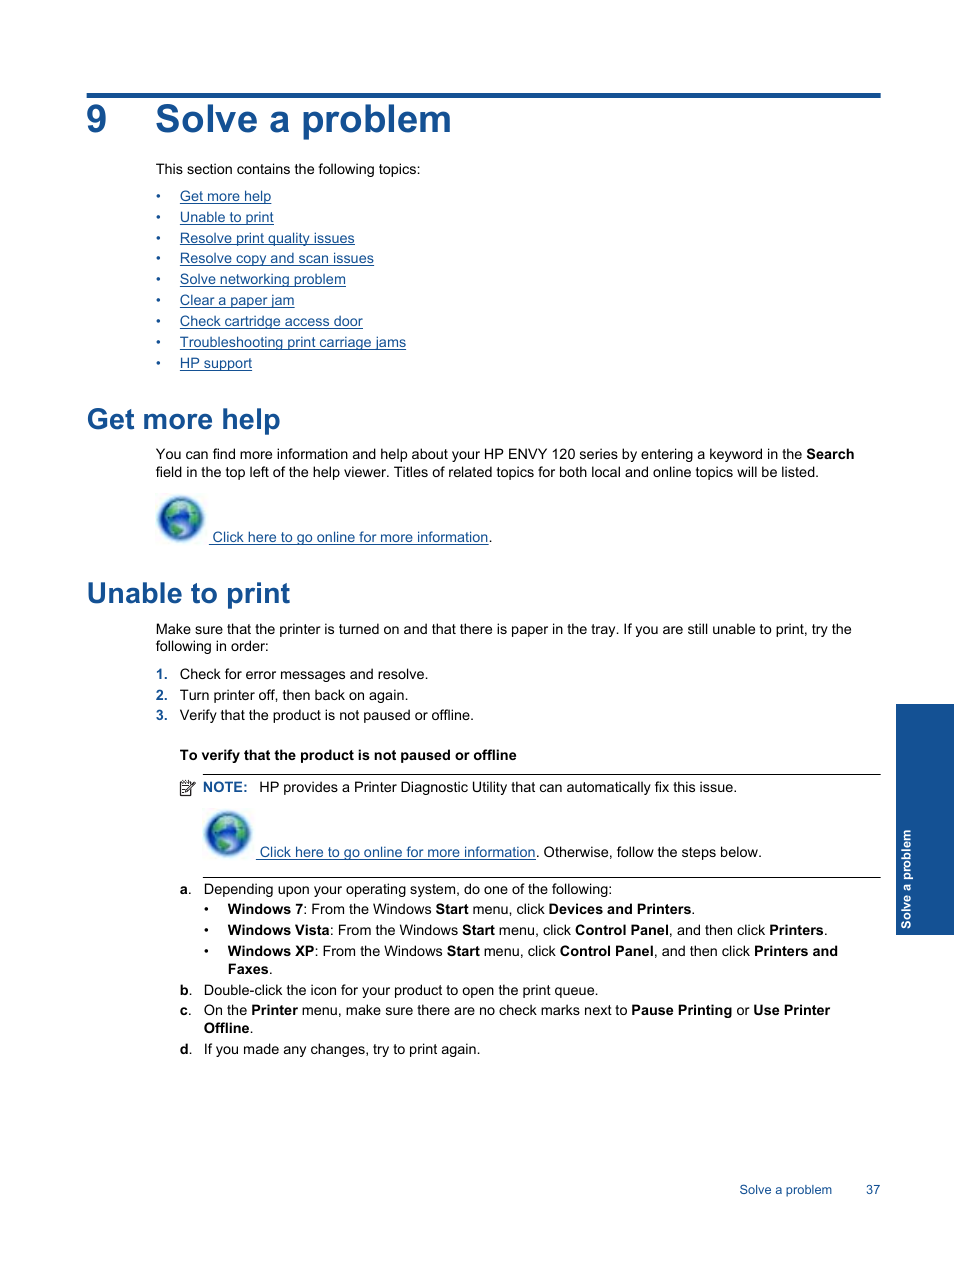 Solve a problem, Get more help, Unable to print | HP ENVY 120 e-All-in-One  Printer User Manual | Page 39 / 62